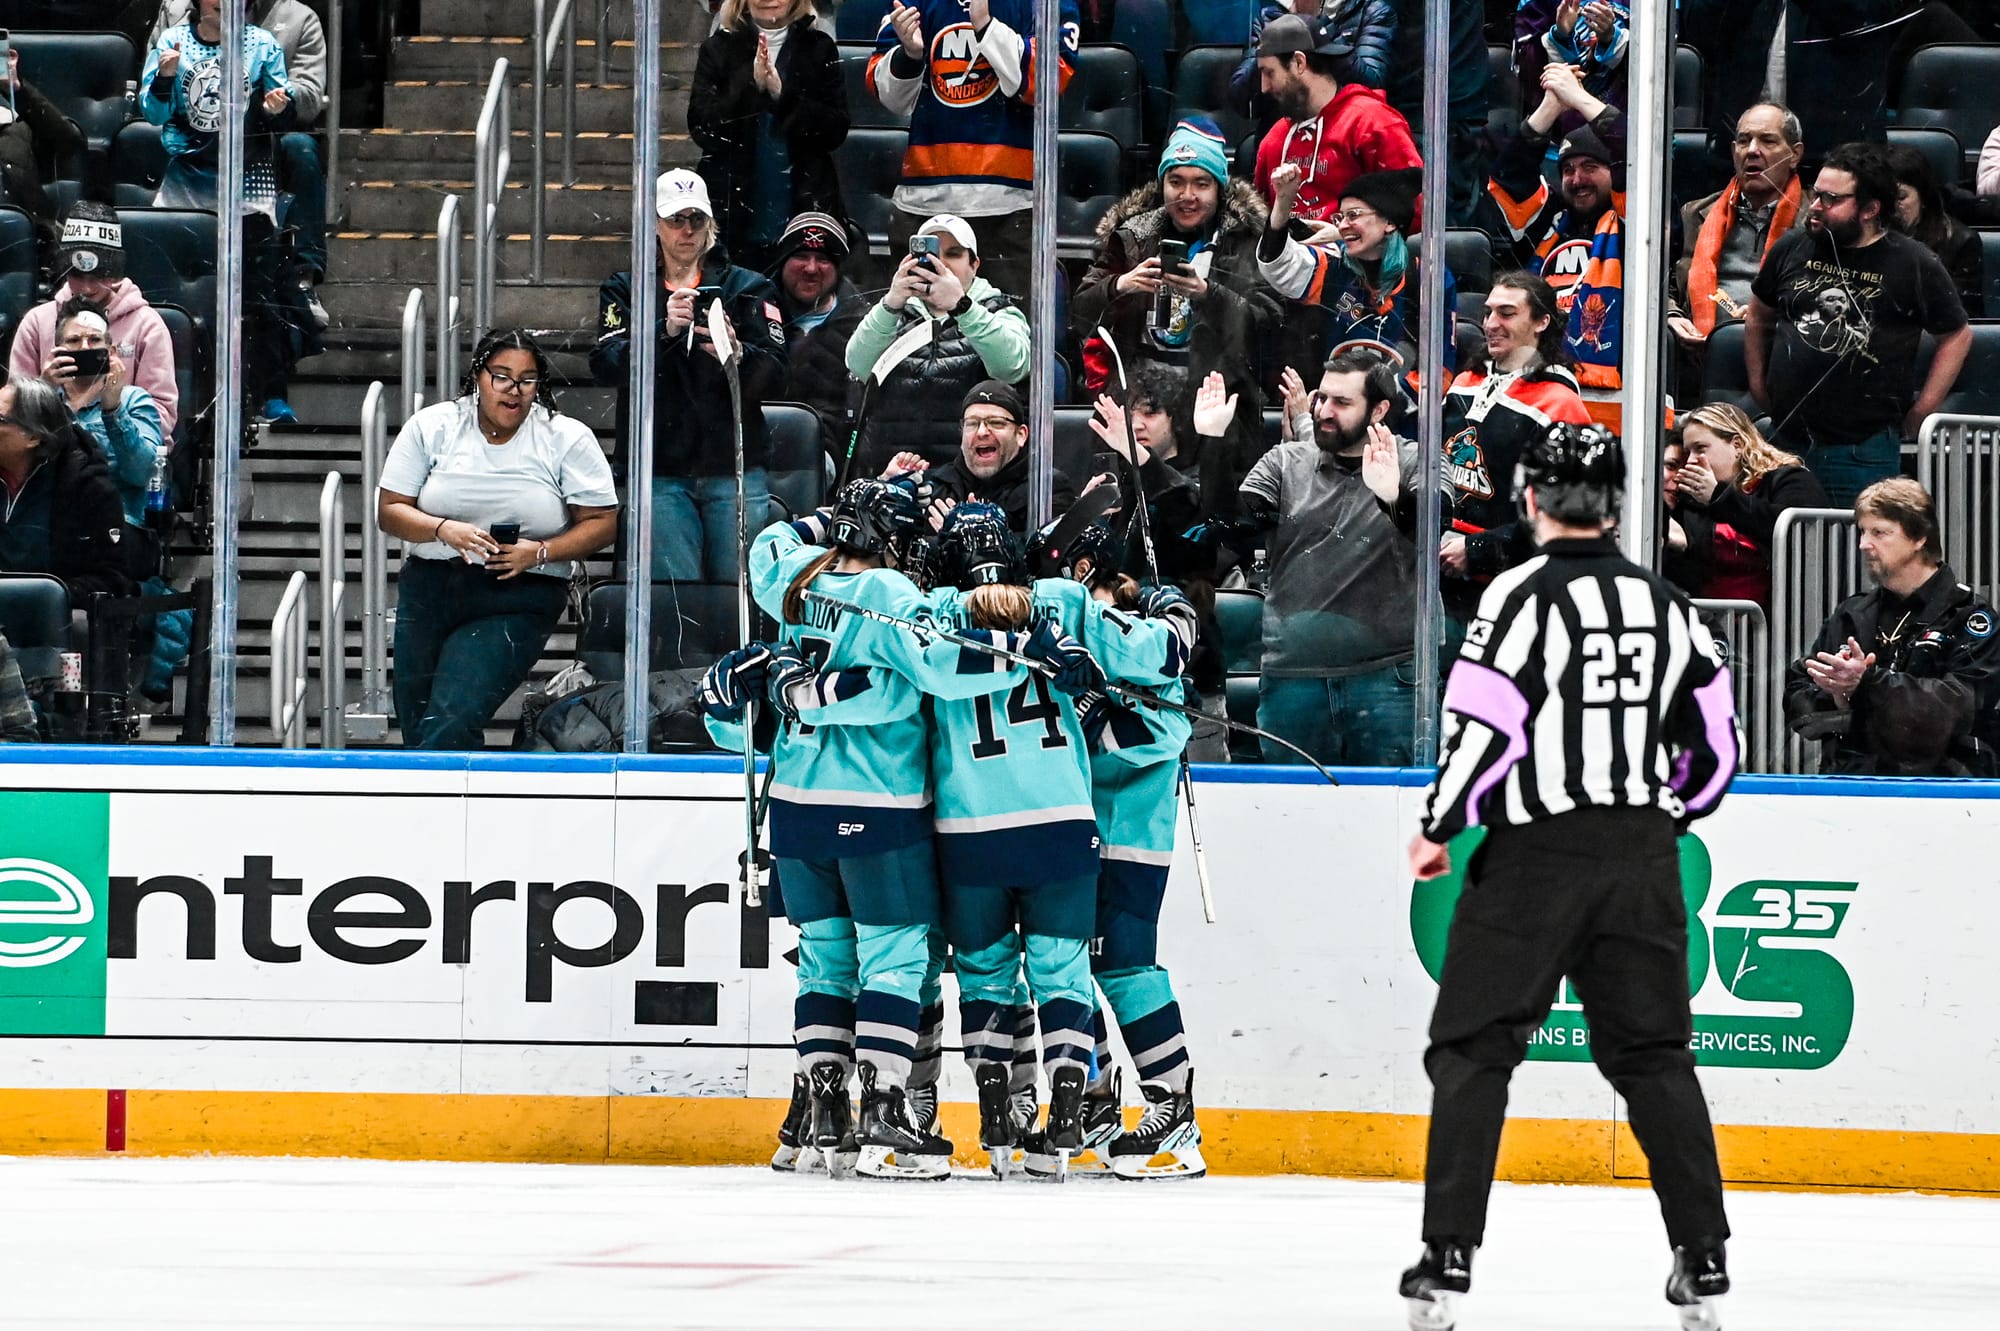 Members of PWHL New York, wearing their teal away uniforms, celebrate a goal against Montréal.